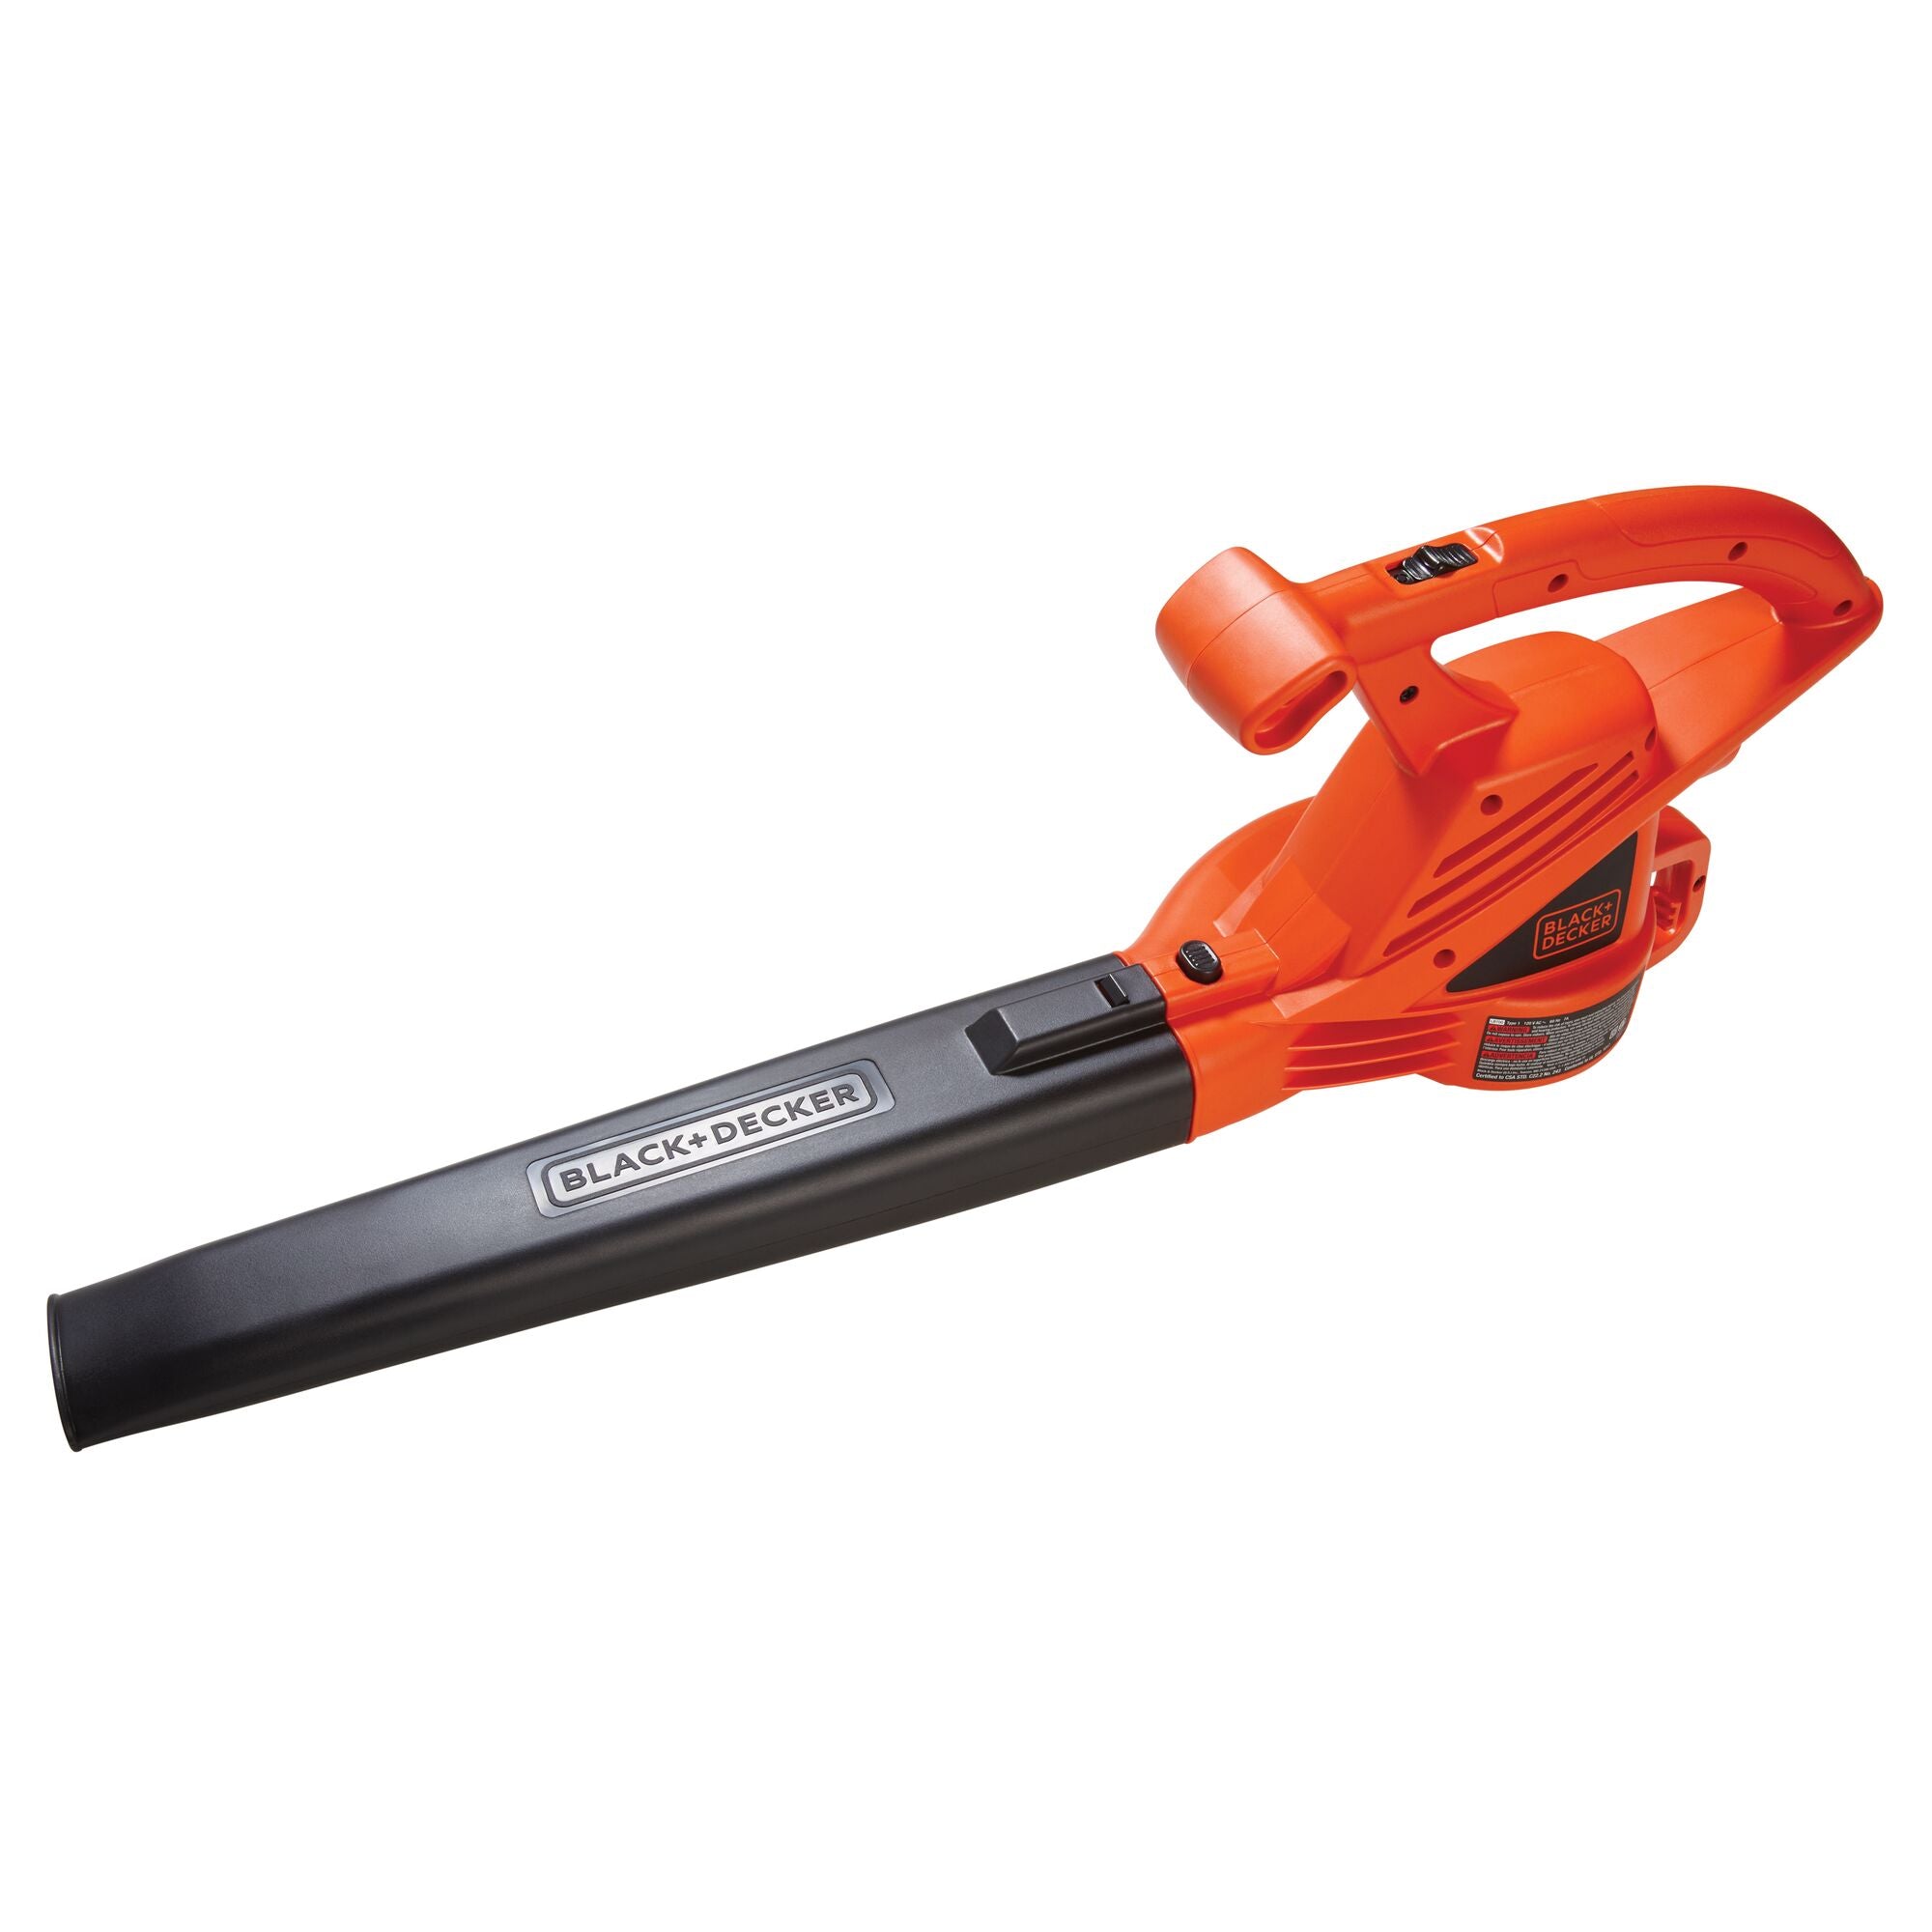 Black+Decker 40V Max Sweeper LSW40C Review